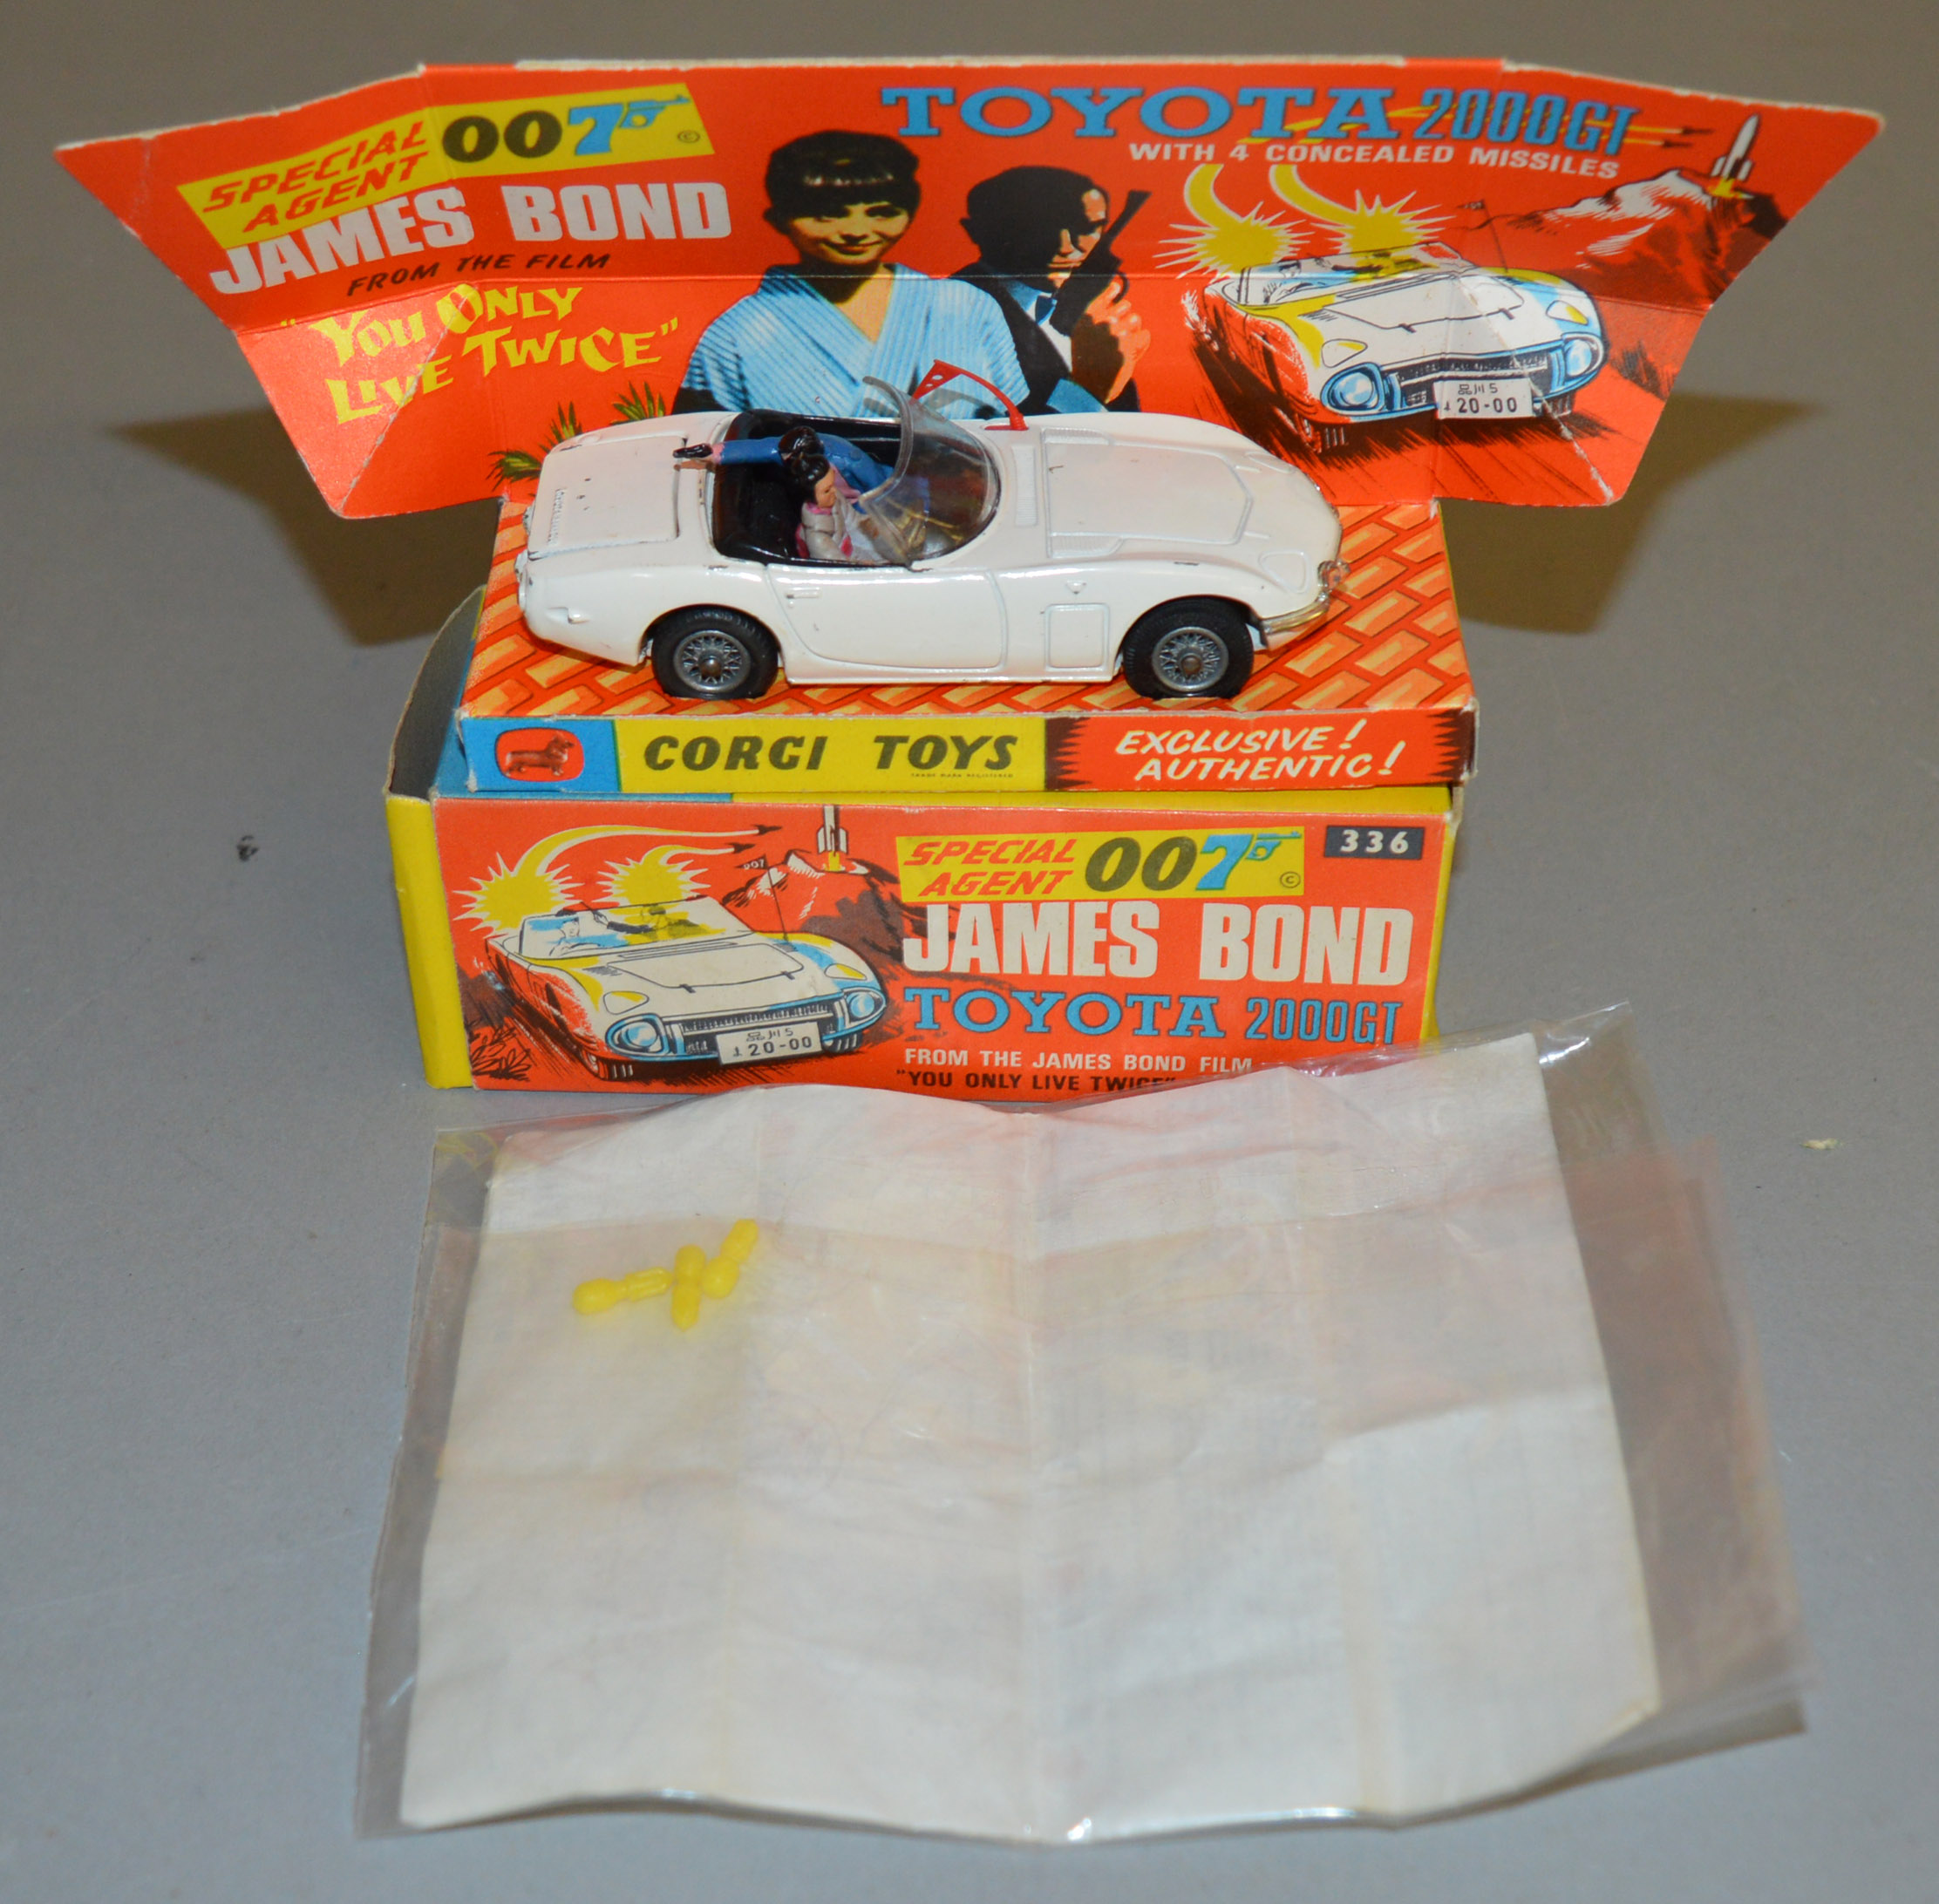 A Corgi Toys 336 James Bond 007 Toyota 2000GT, G in G+ box with envelope, instruction sheet, cloth - Image 2 of 2